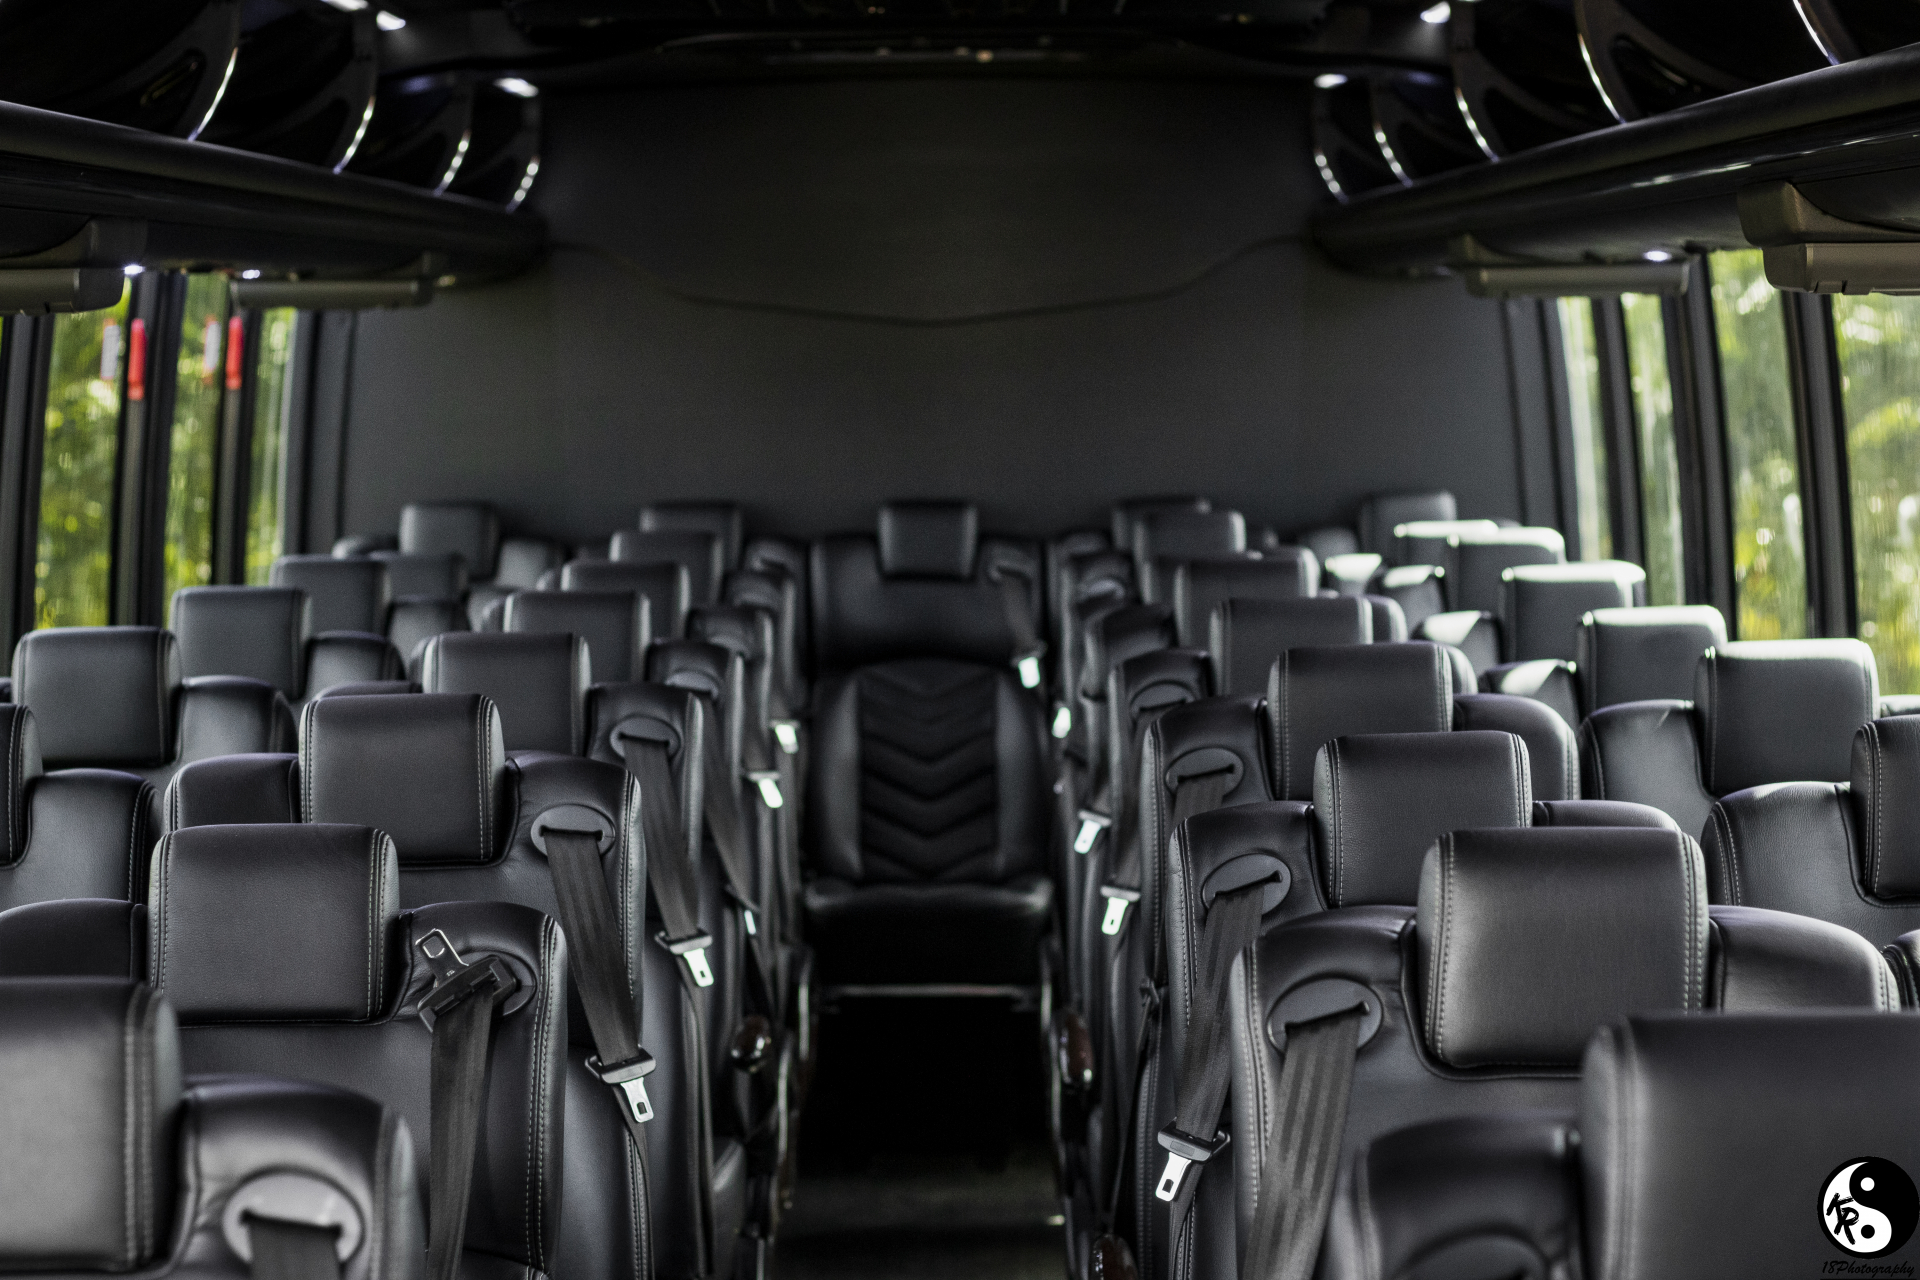 2018 Grech Freightliner(40 passengers)
Party Limo Bus /
Boca Raton, FL

 / Hourly $0.00
